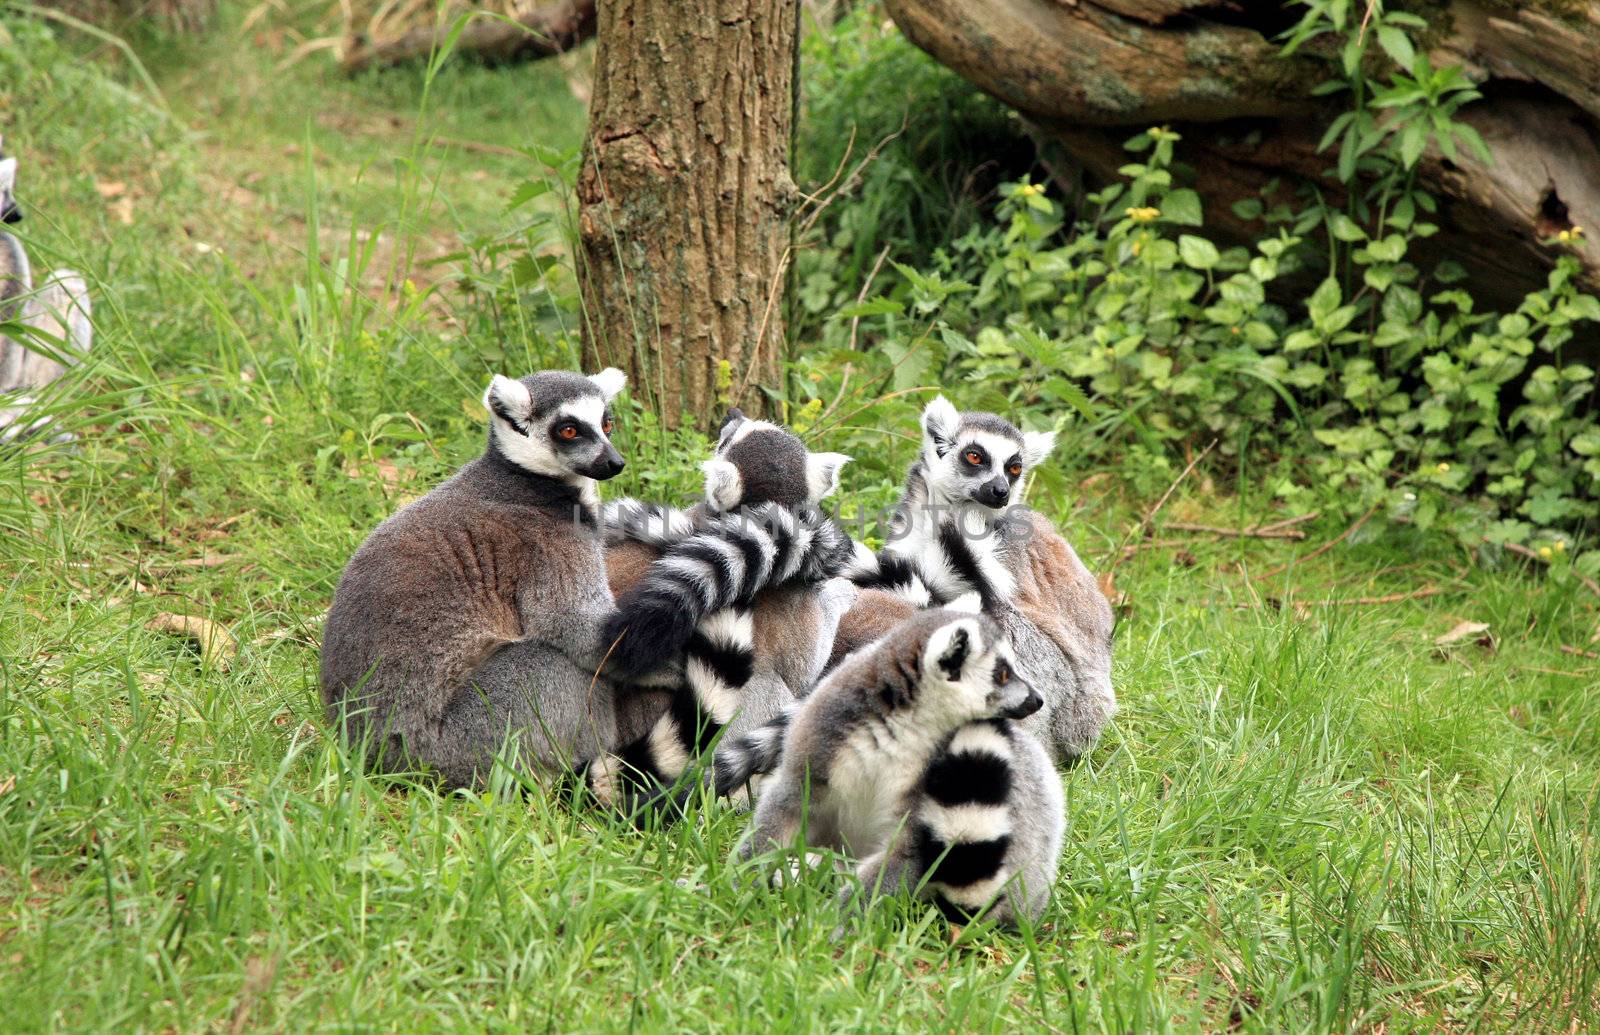 A ring-tailed lemur family is enjoying the sun. Familly of lemurs.